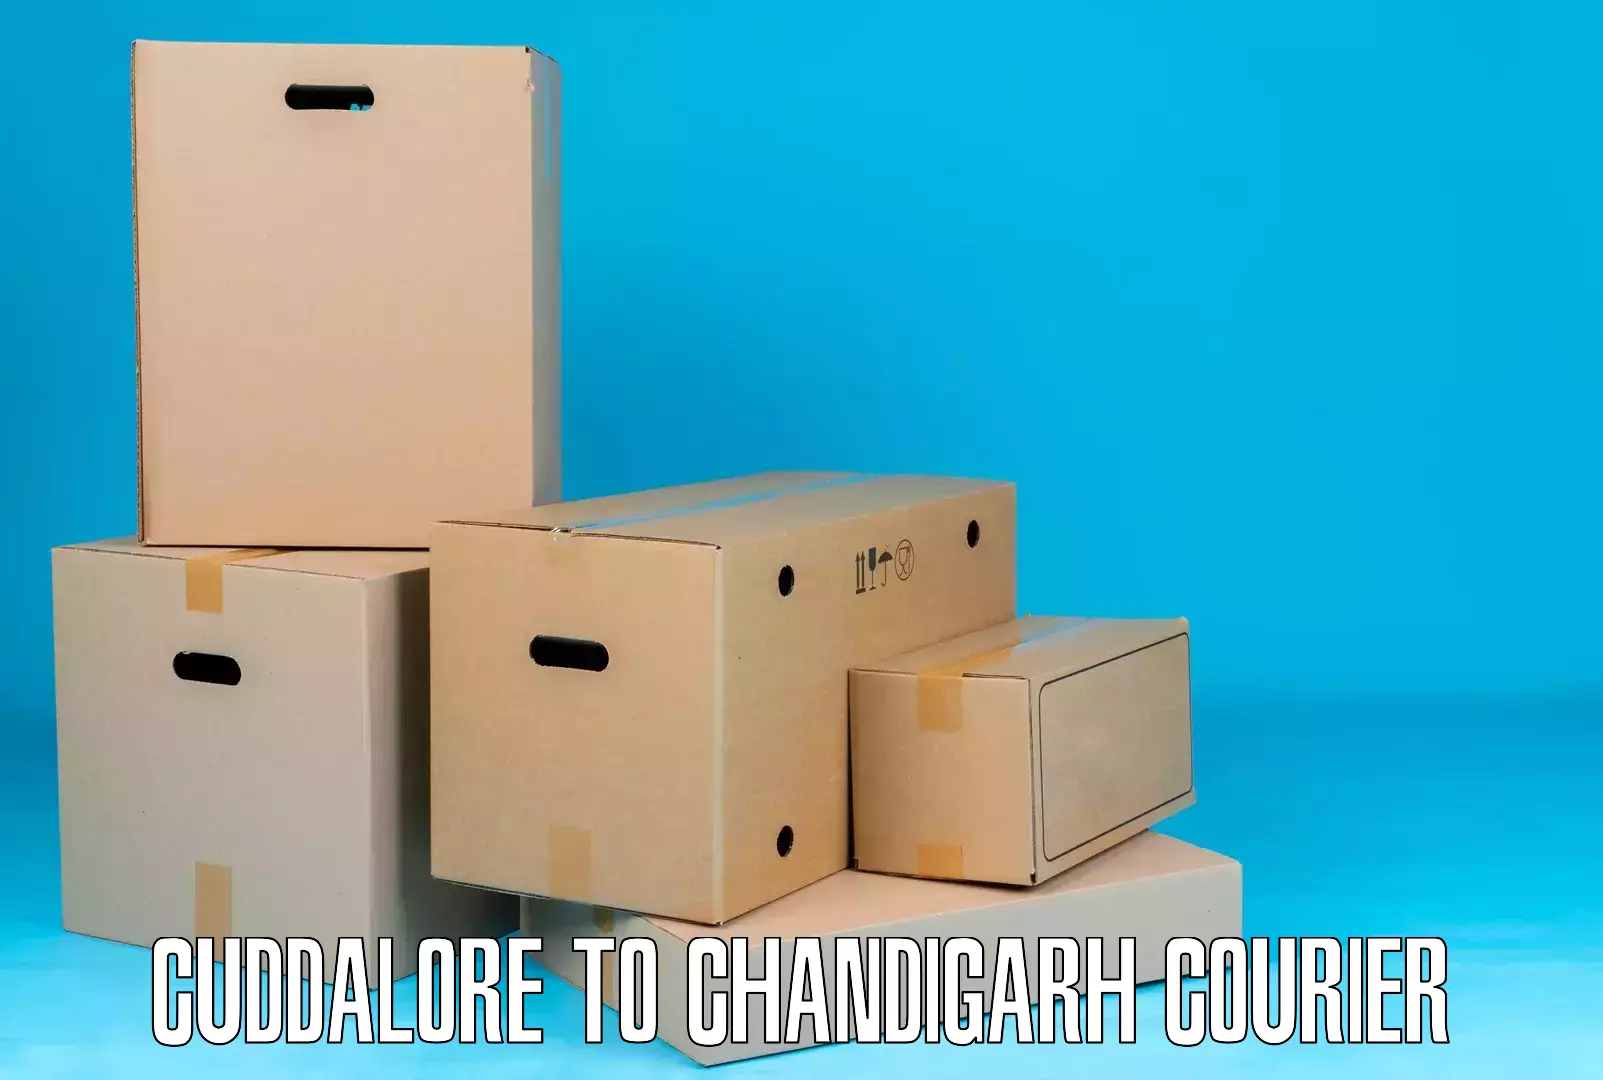 High-capacity courier solutions Cuddalore to Chandigarh